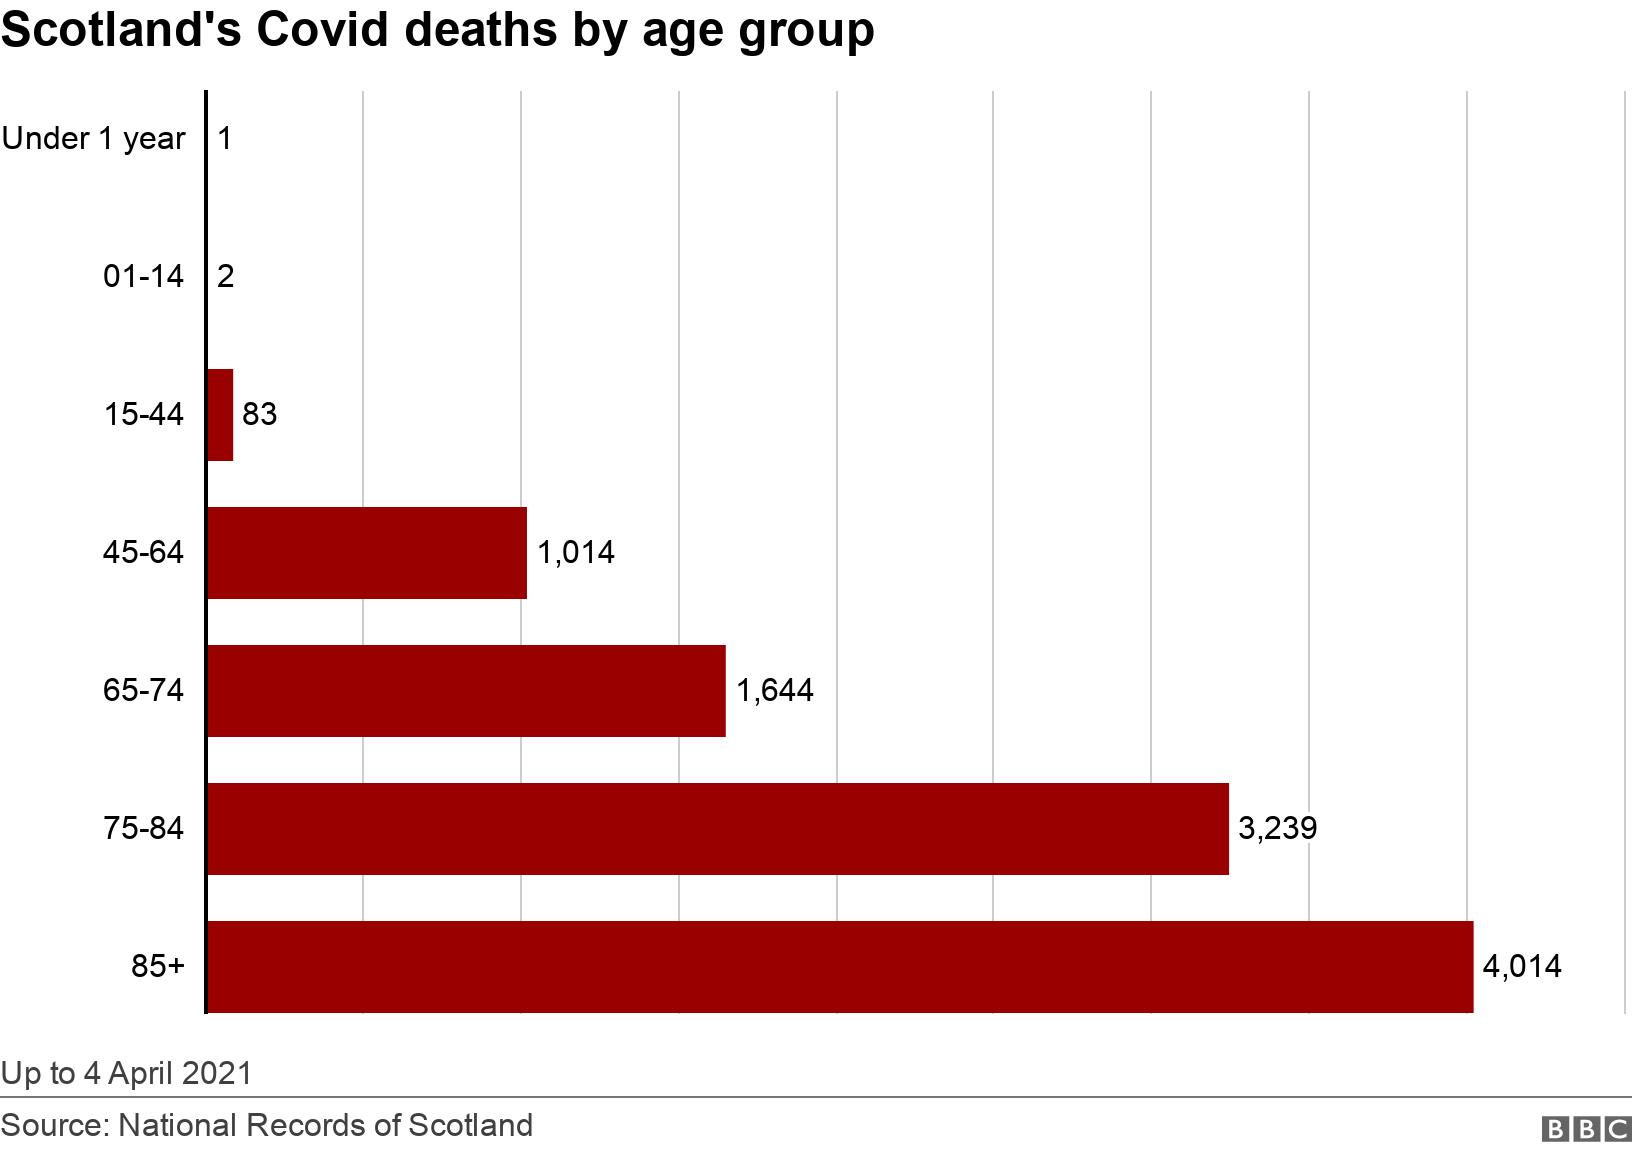 Scotland's Covid deaths by age group. .  Up to 4 April 2021.